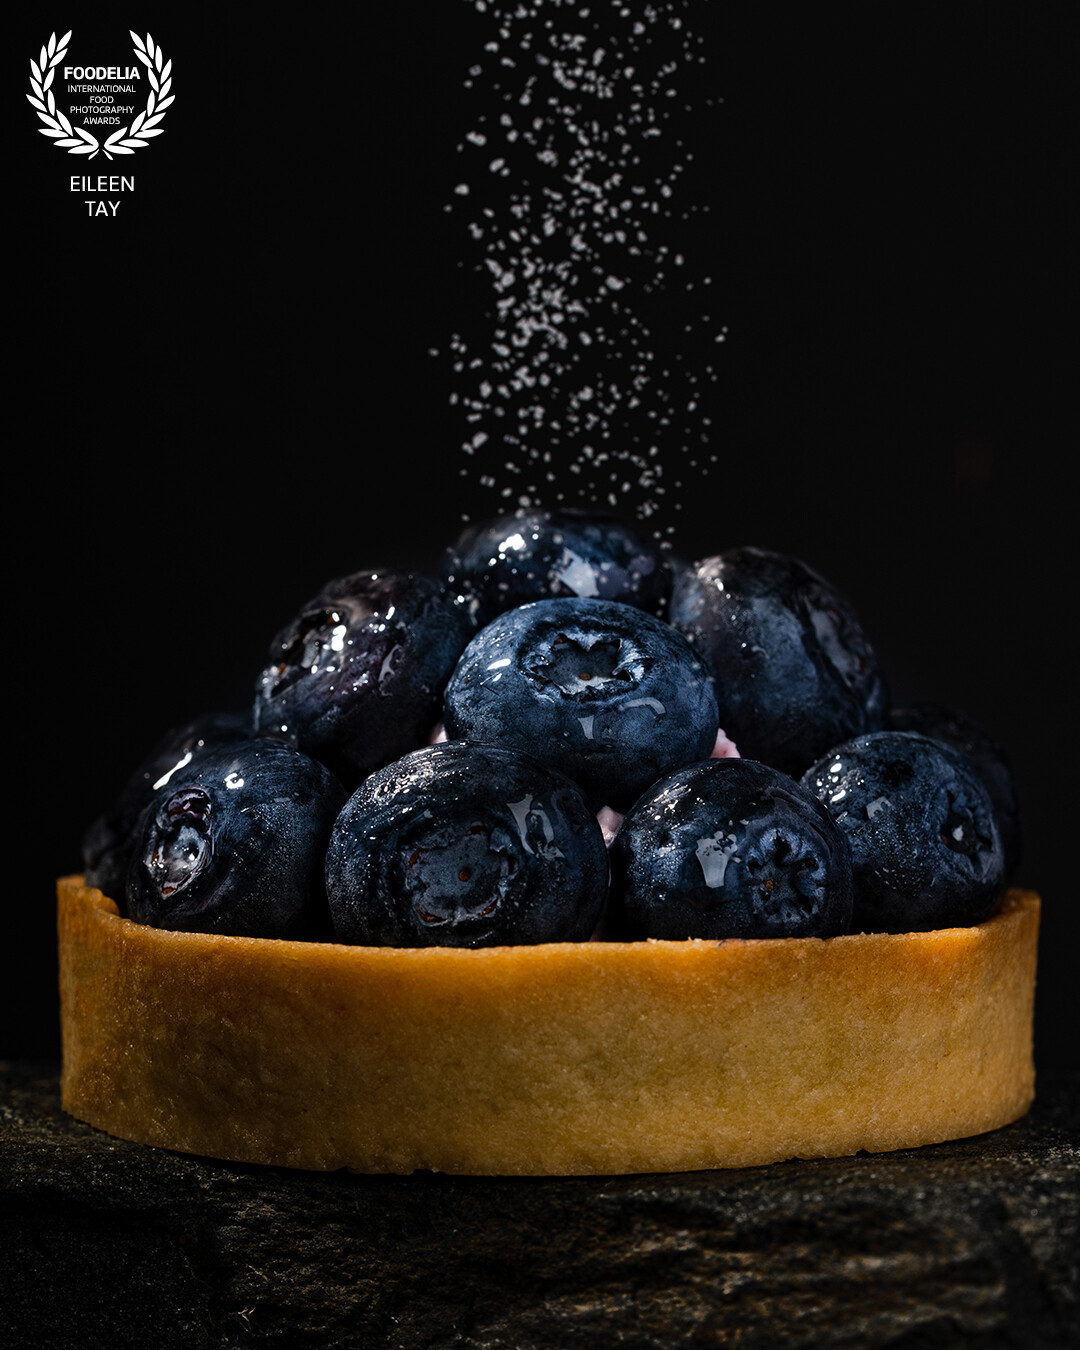 Shot this photo for Kerkies Dessert, using a 90mm macro lens. Captured juicy blueberries on the tart, and the glistening droplets to enhance the overall mouthwatering appeal.<br />
<br />
The key is to make the viewer crave the tart through my photo!